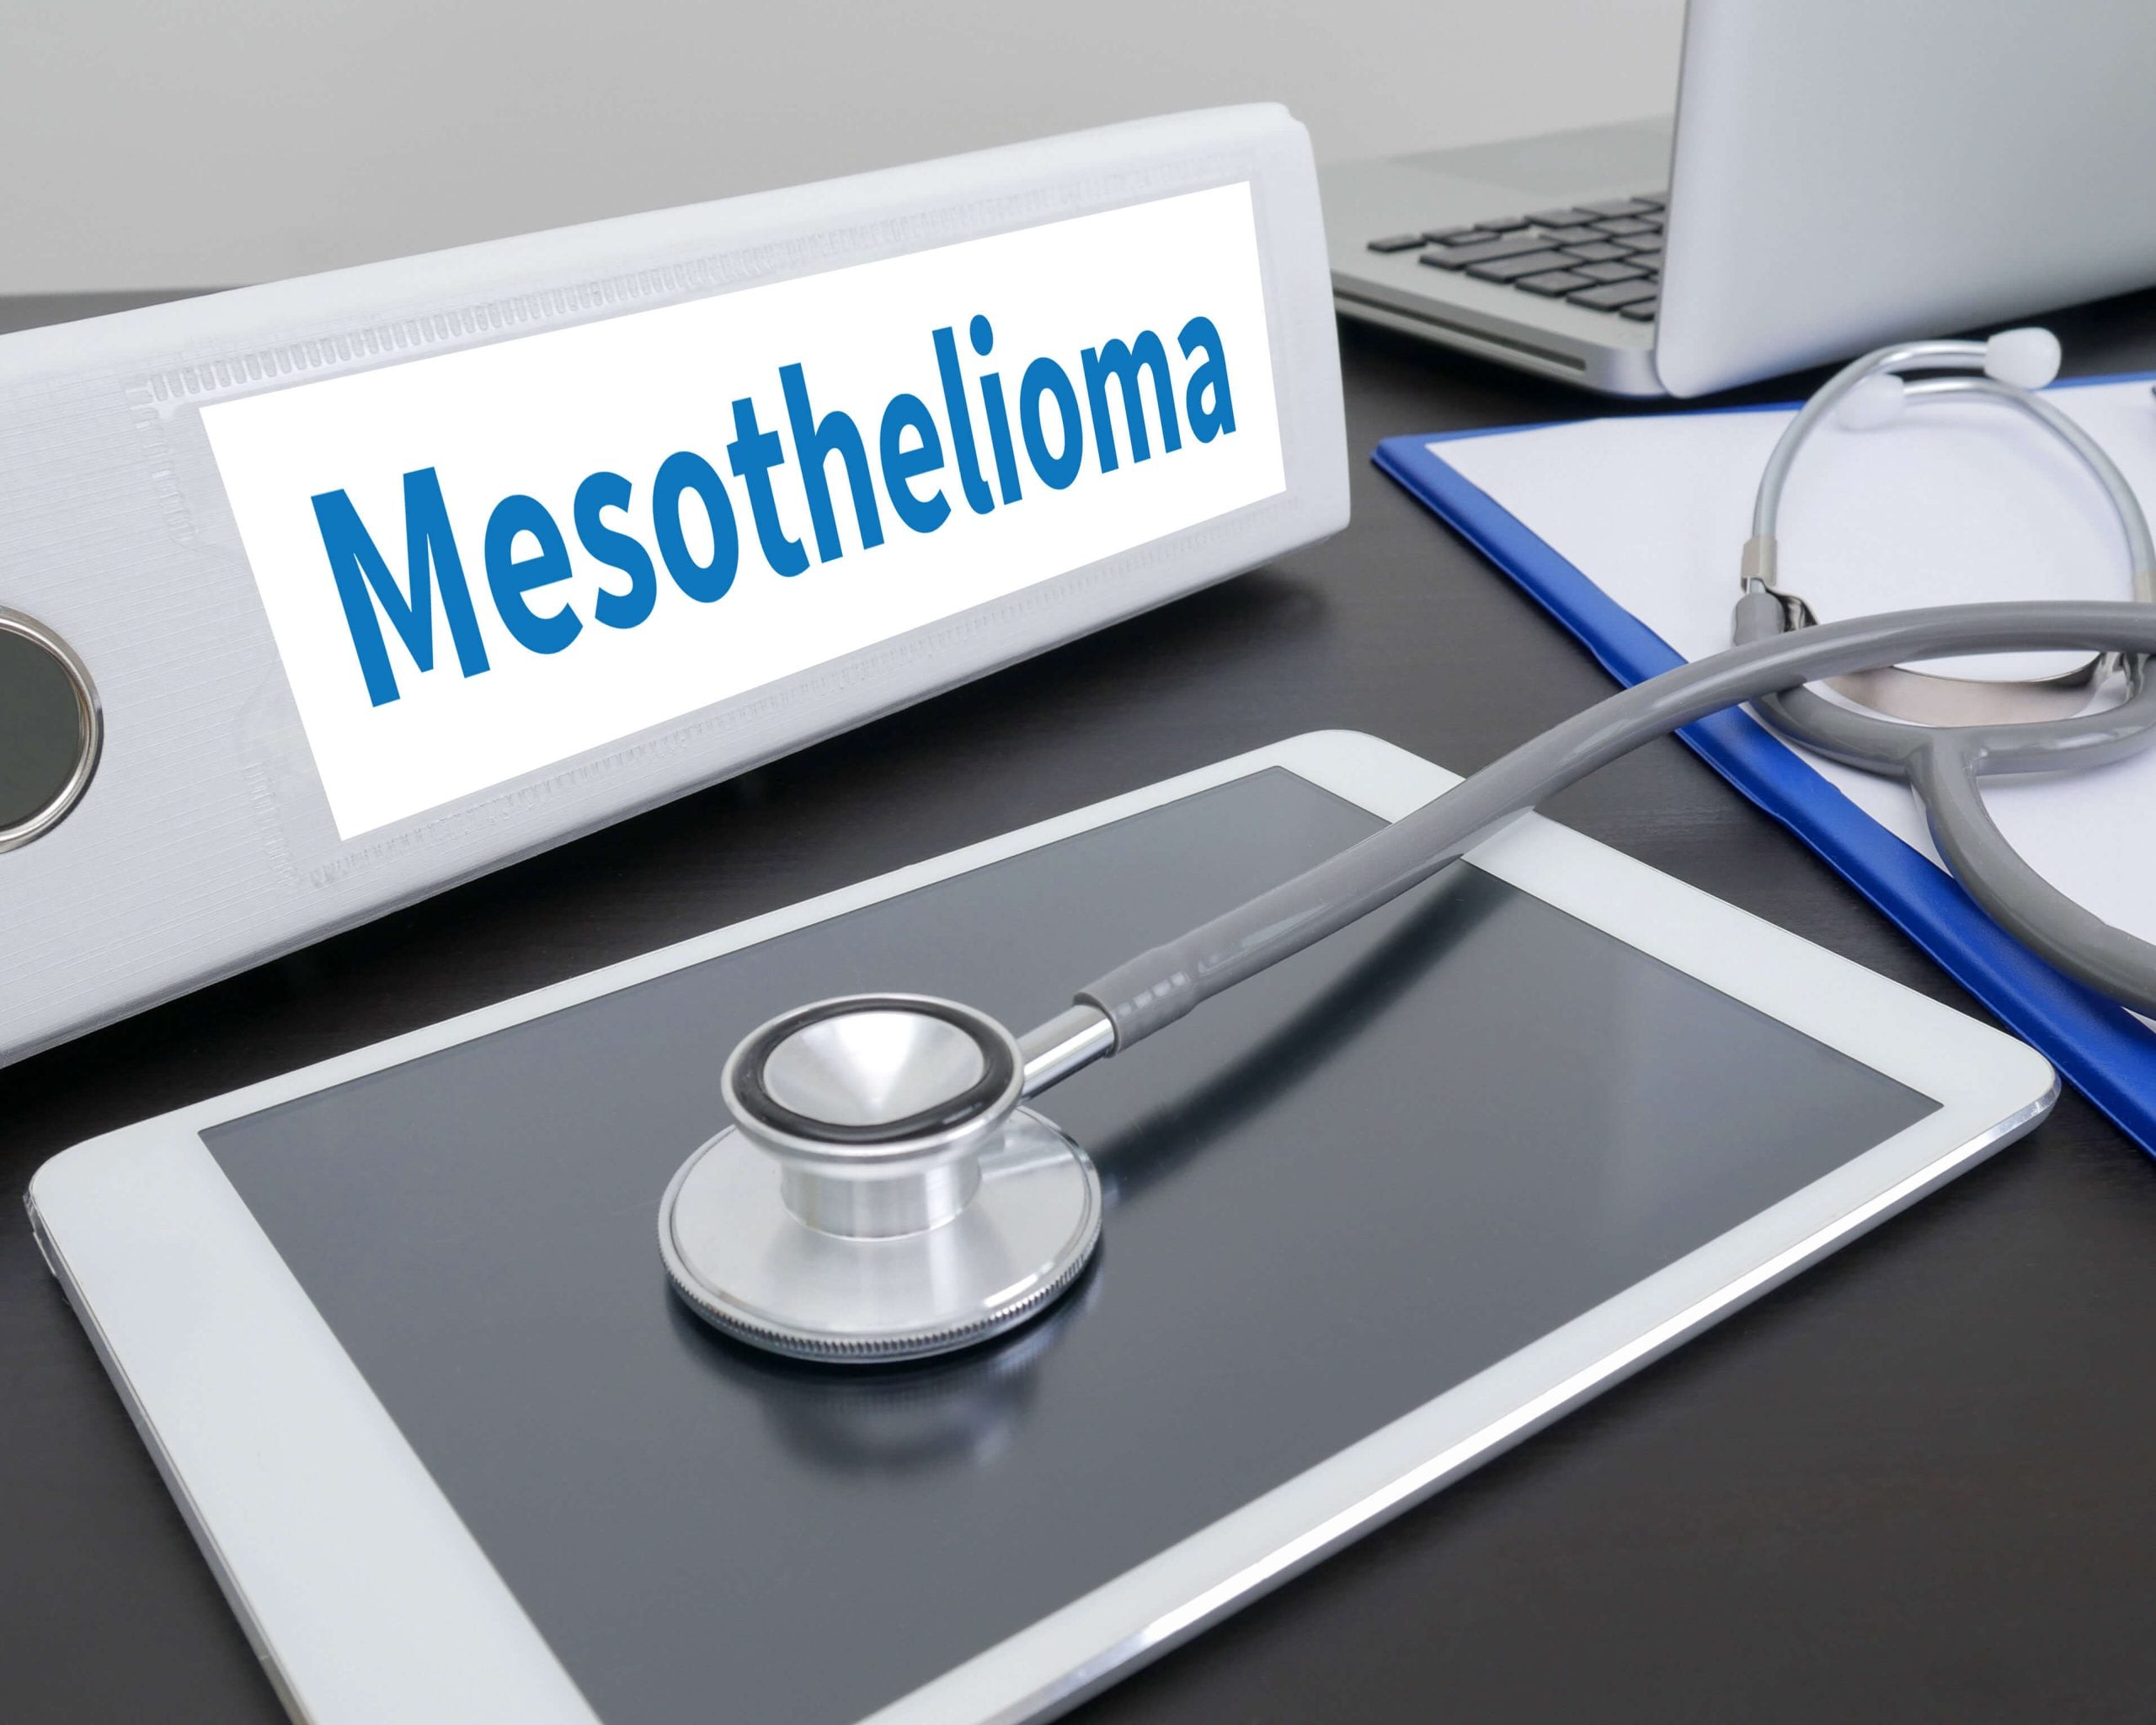 Stages of Mesothelioma